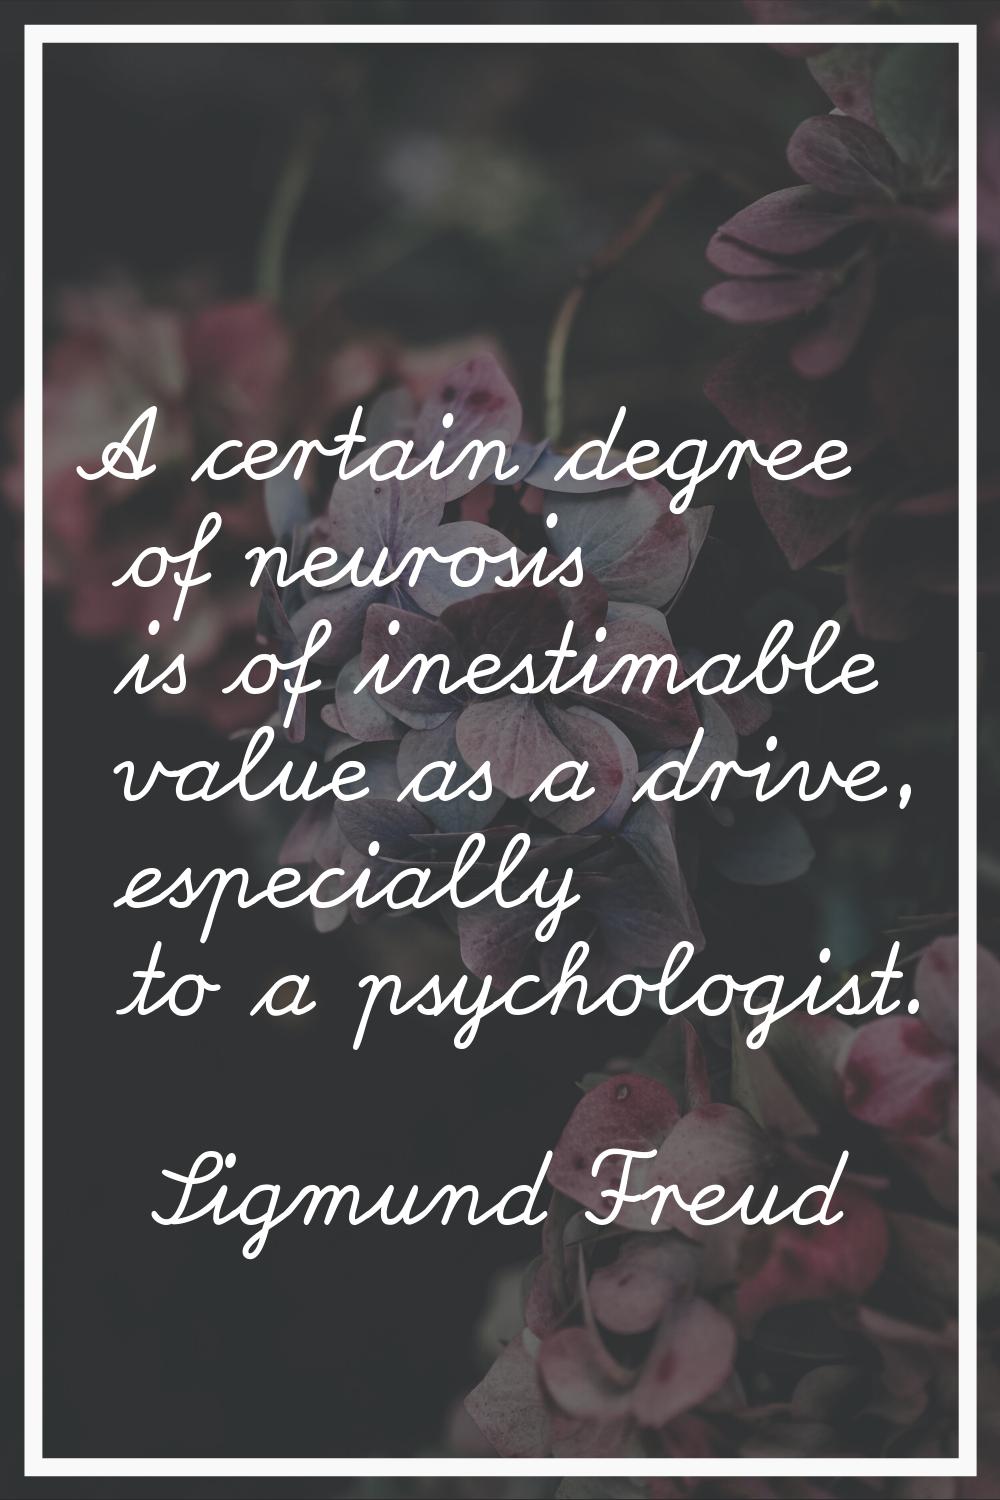 A certain degree of neurosis is of inestimable value as a drive, especially to a psychologist.